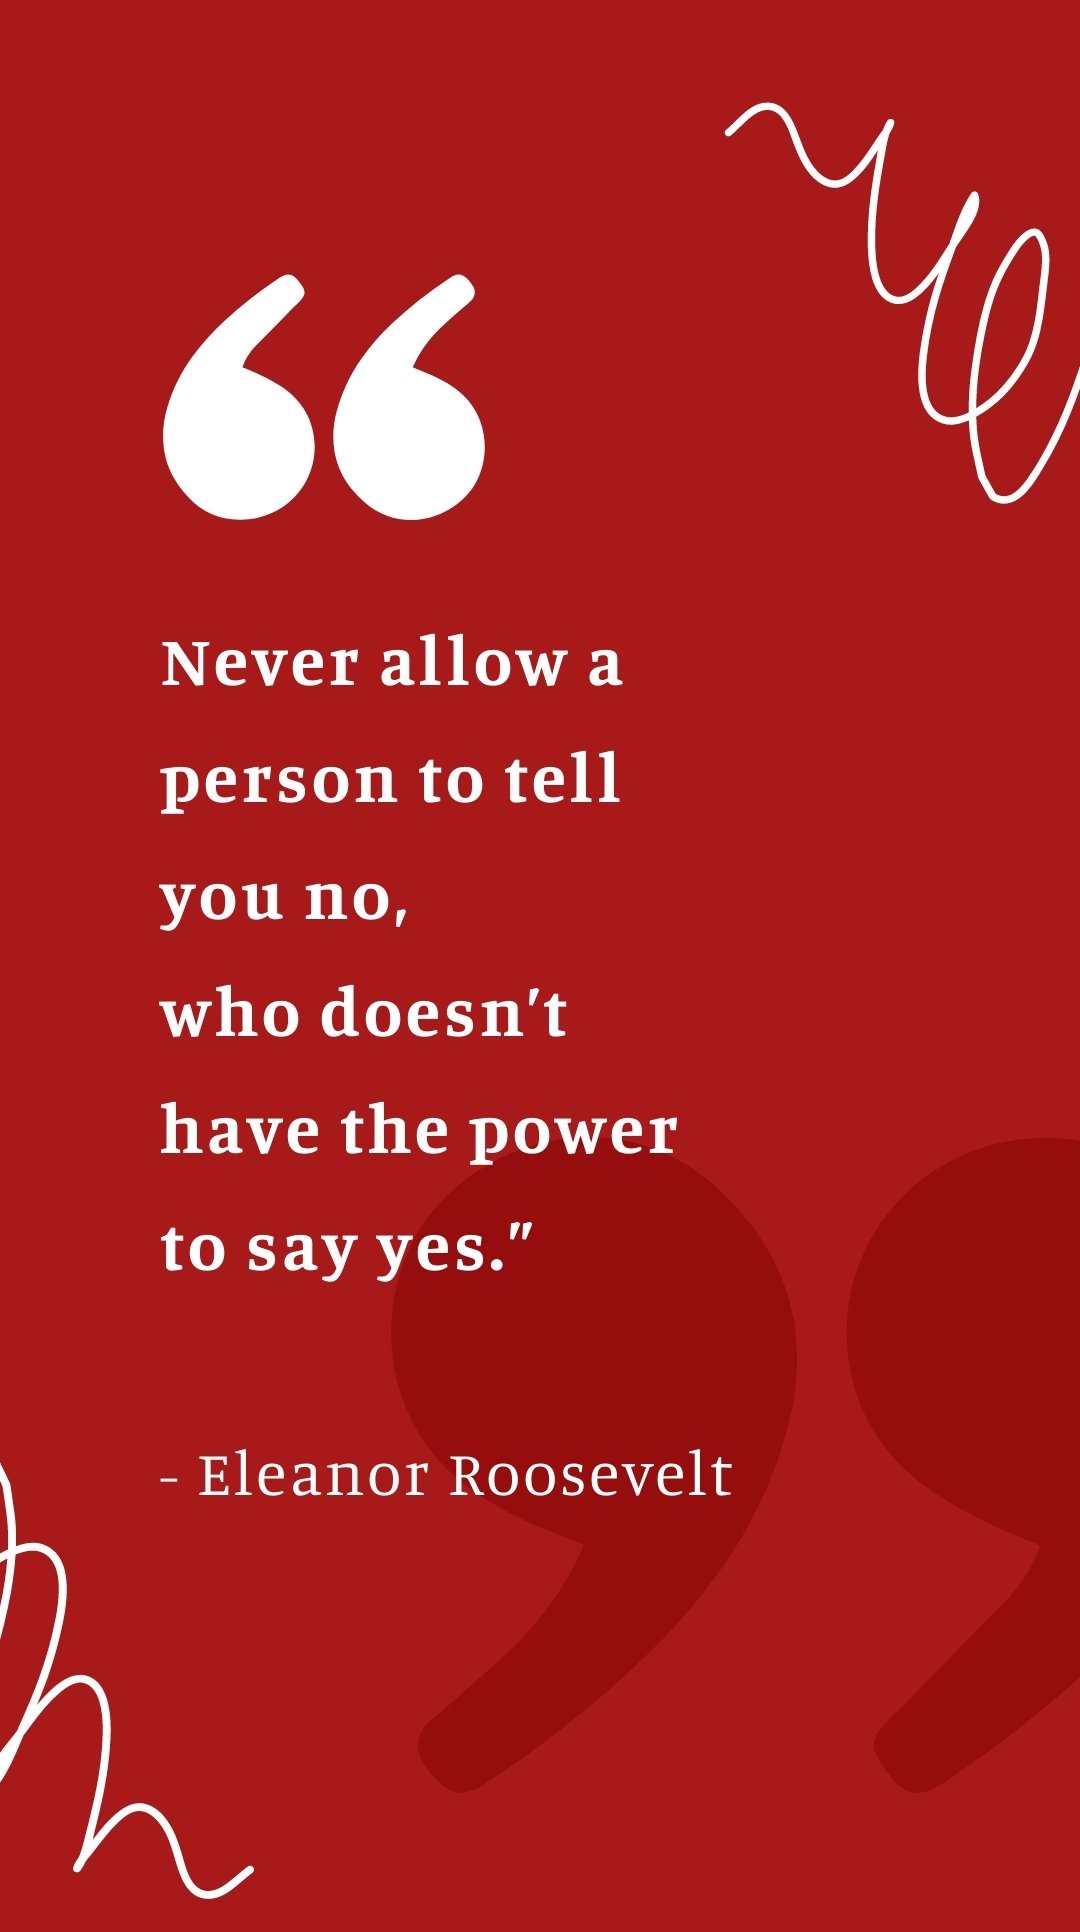 Eleanor Roosevelt - “Never allow a person to tell you no, who doesn’t have the power to say yes.”